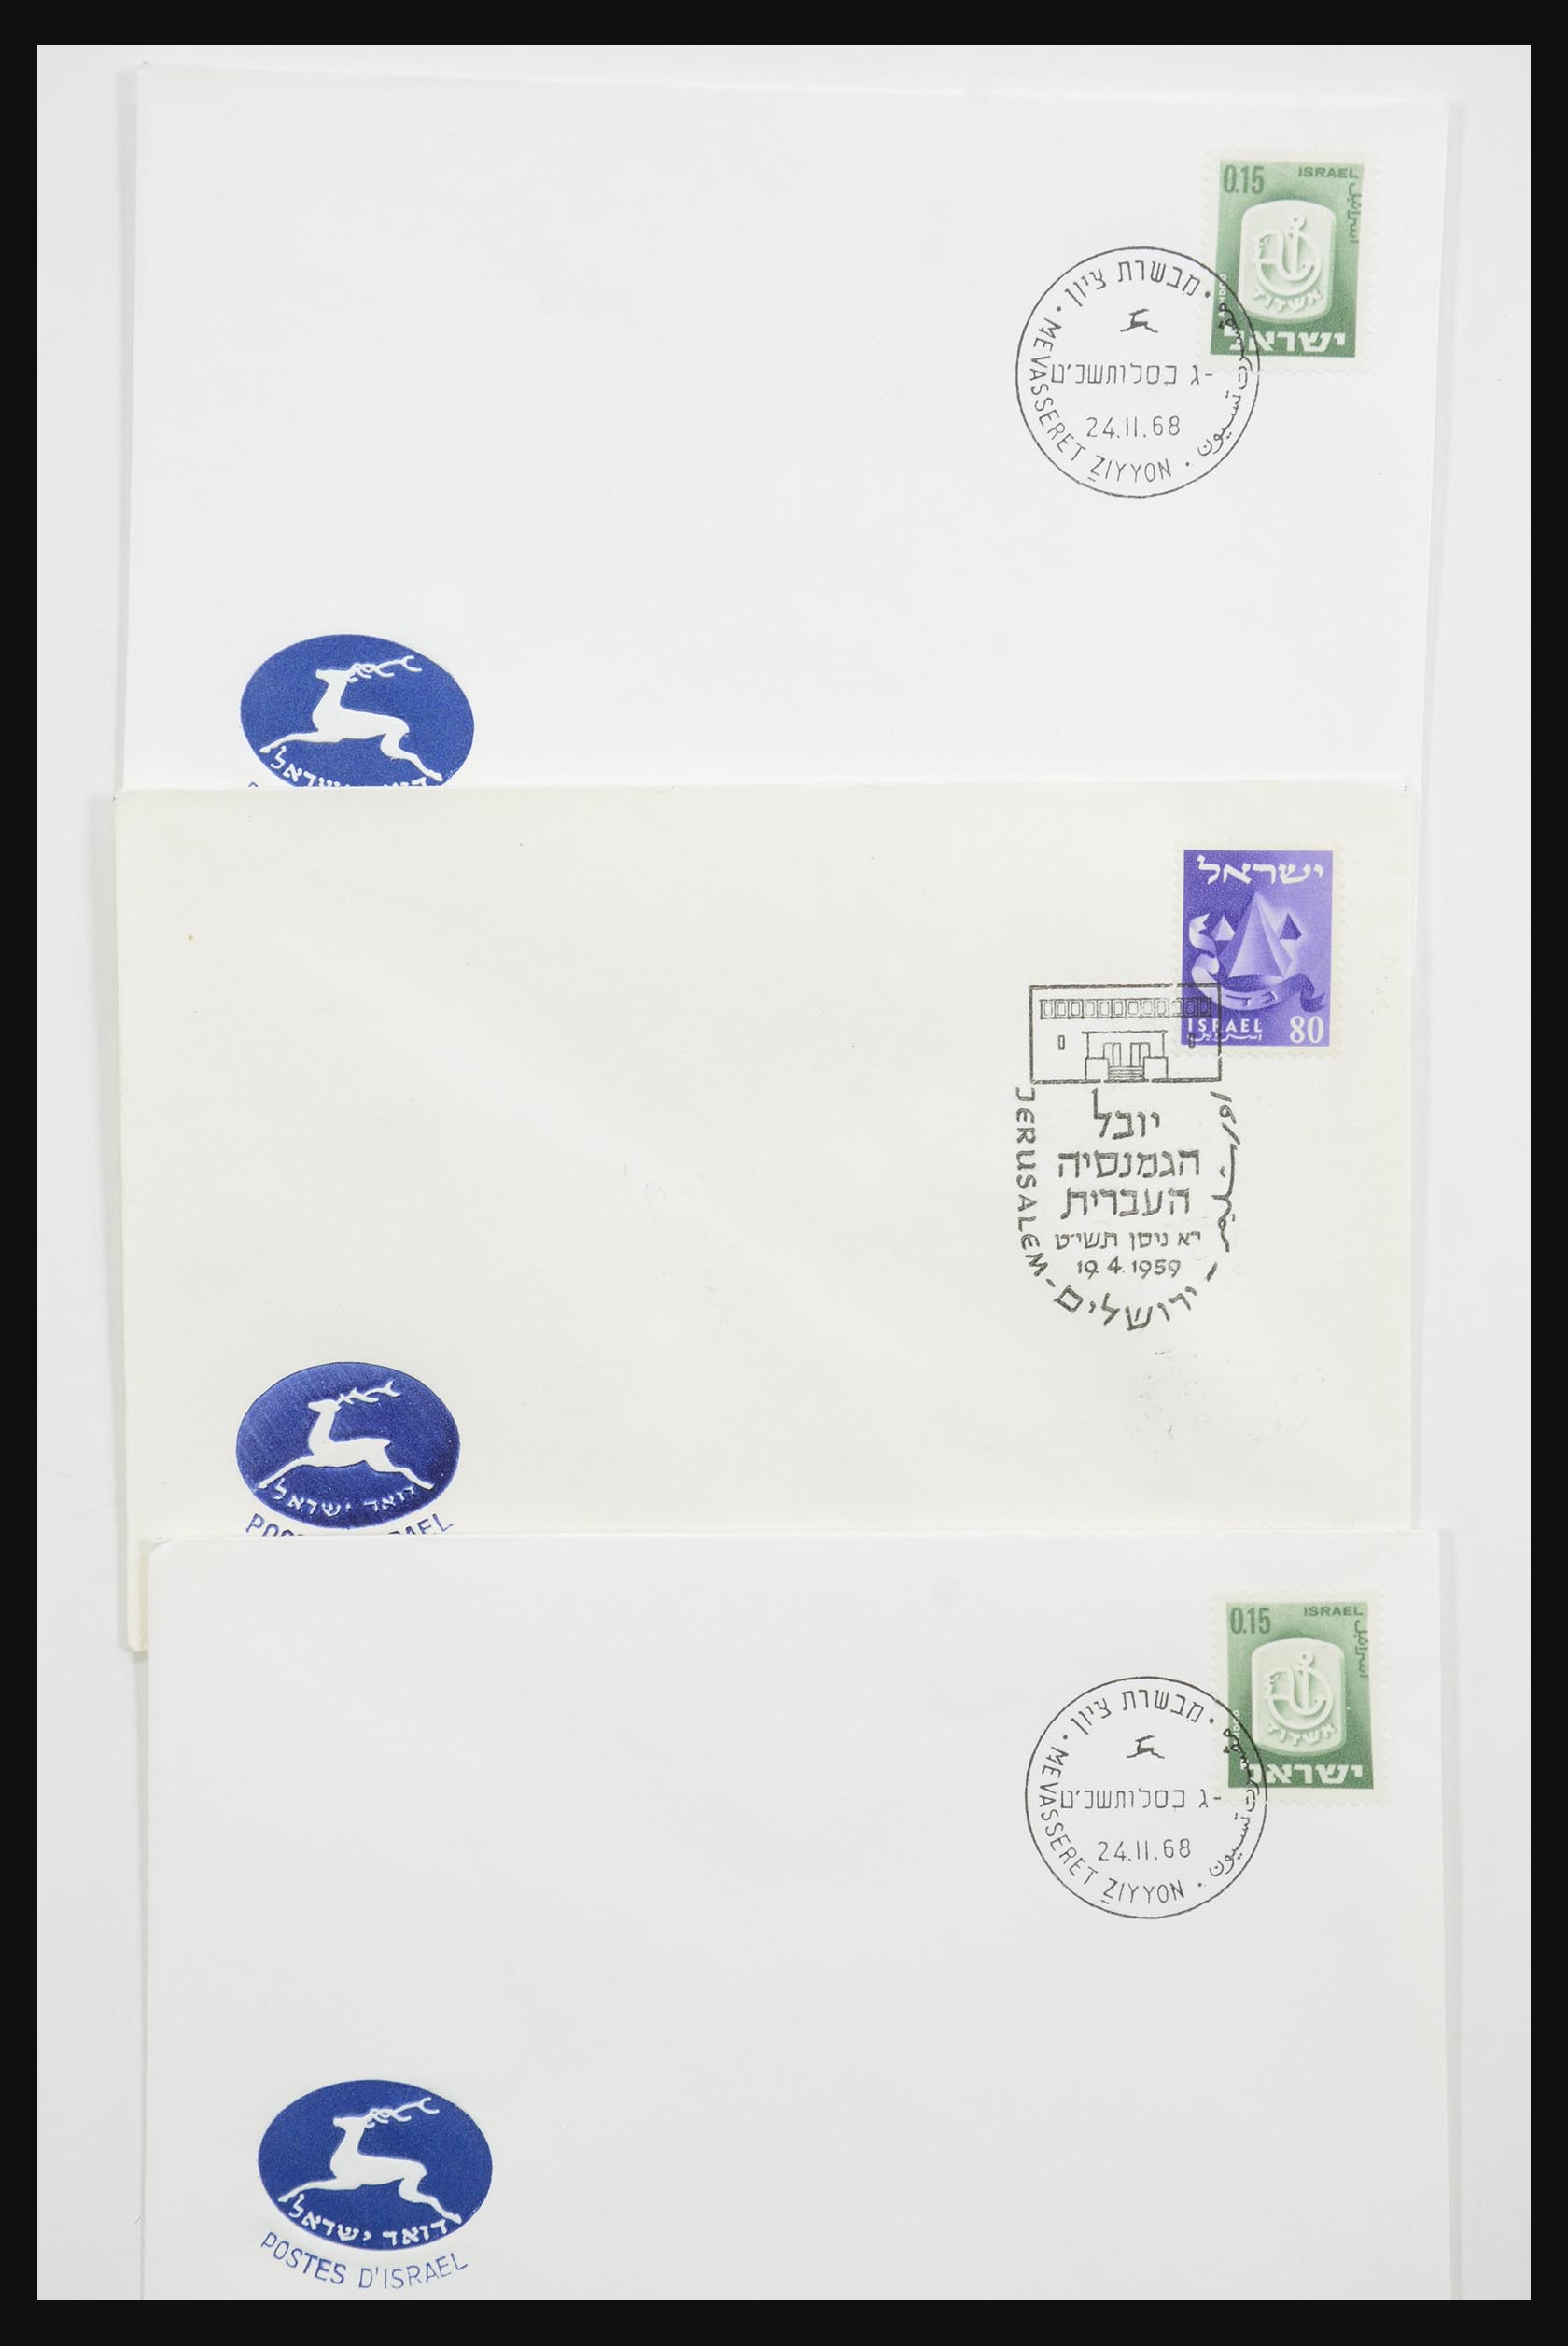 31924 021 - 31924 Israël fdc-collectie 1957-2003.